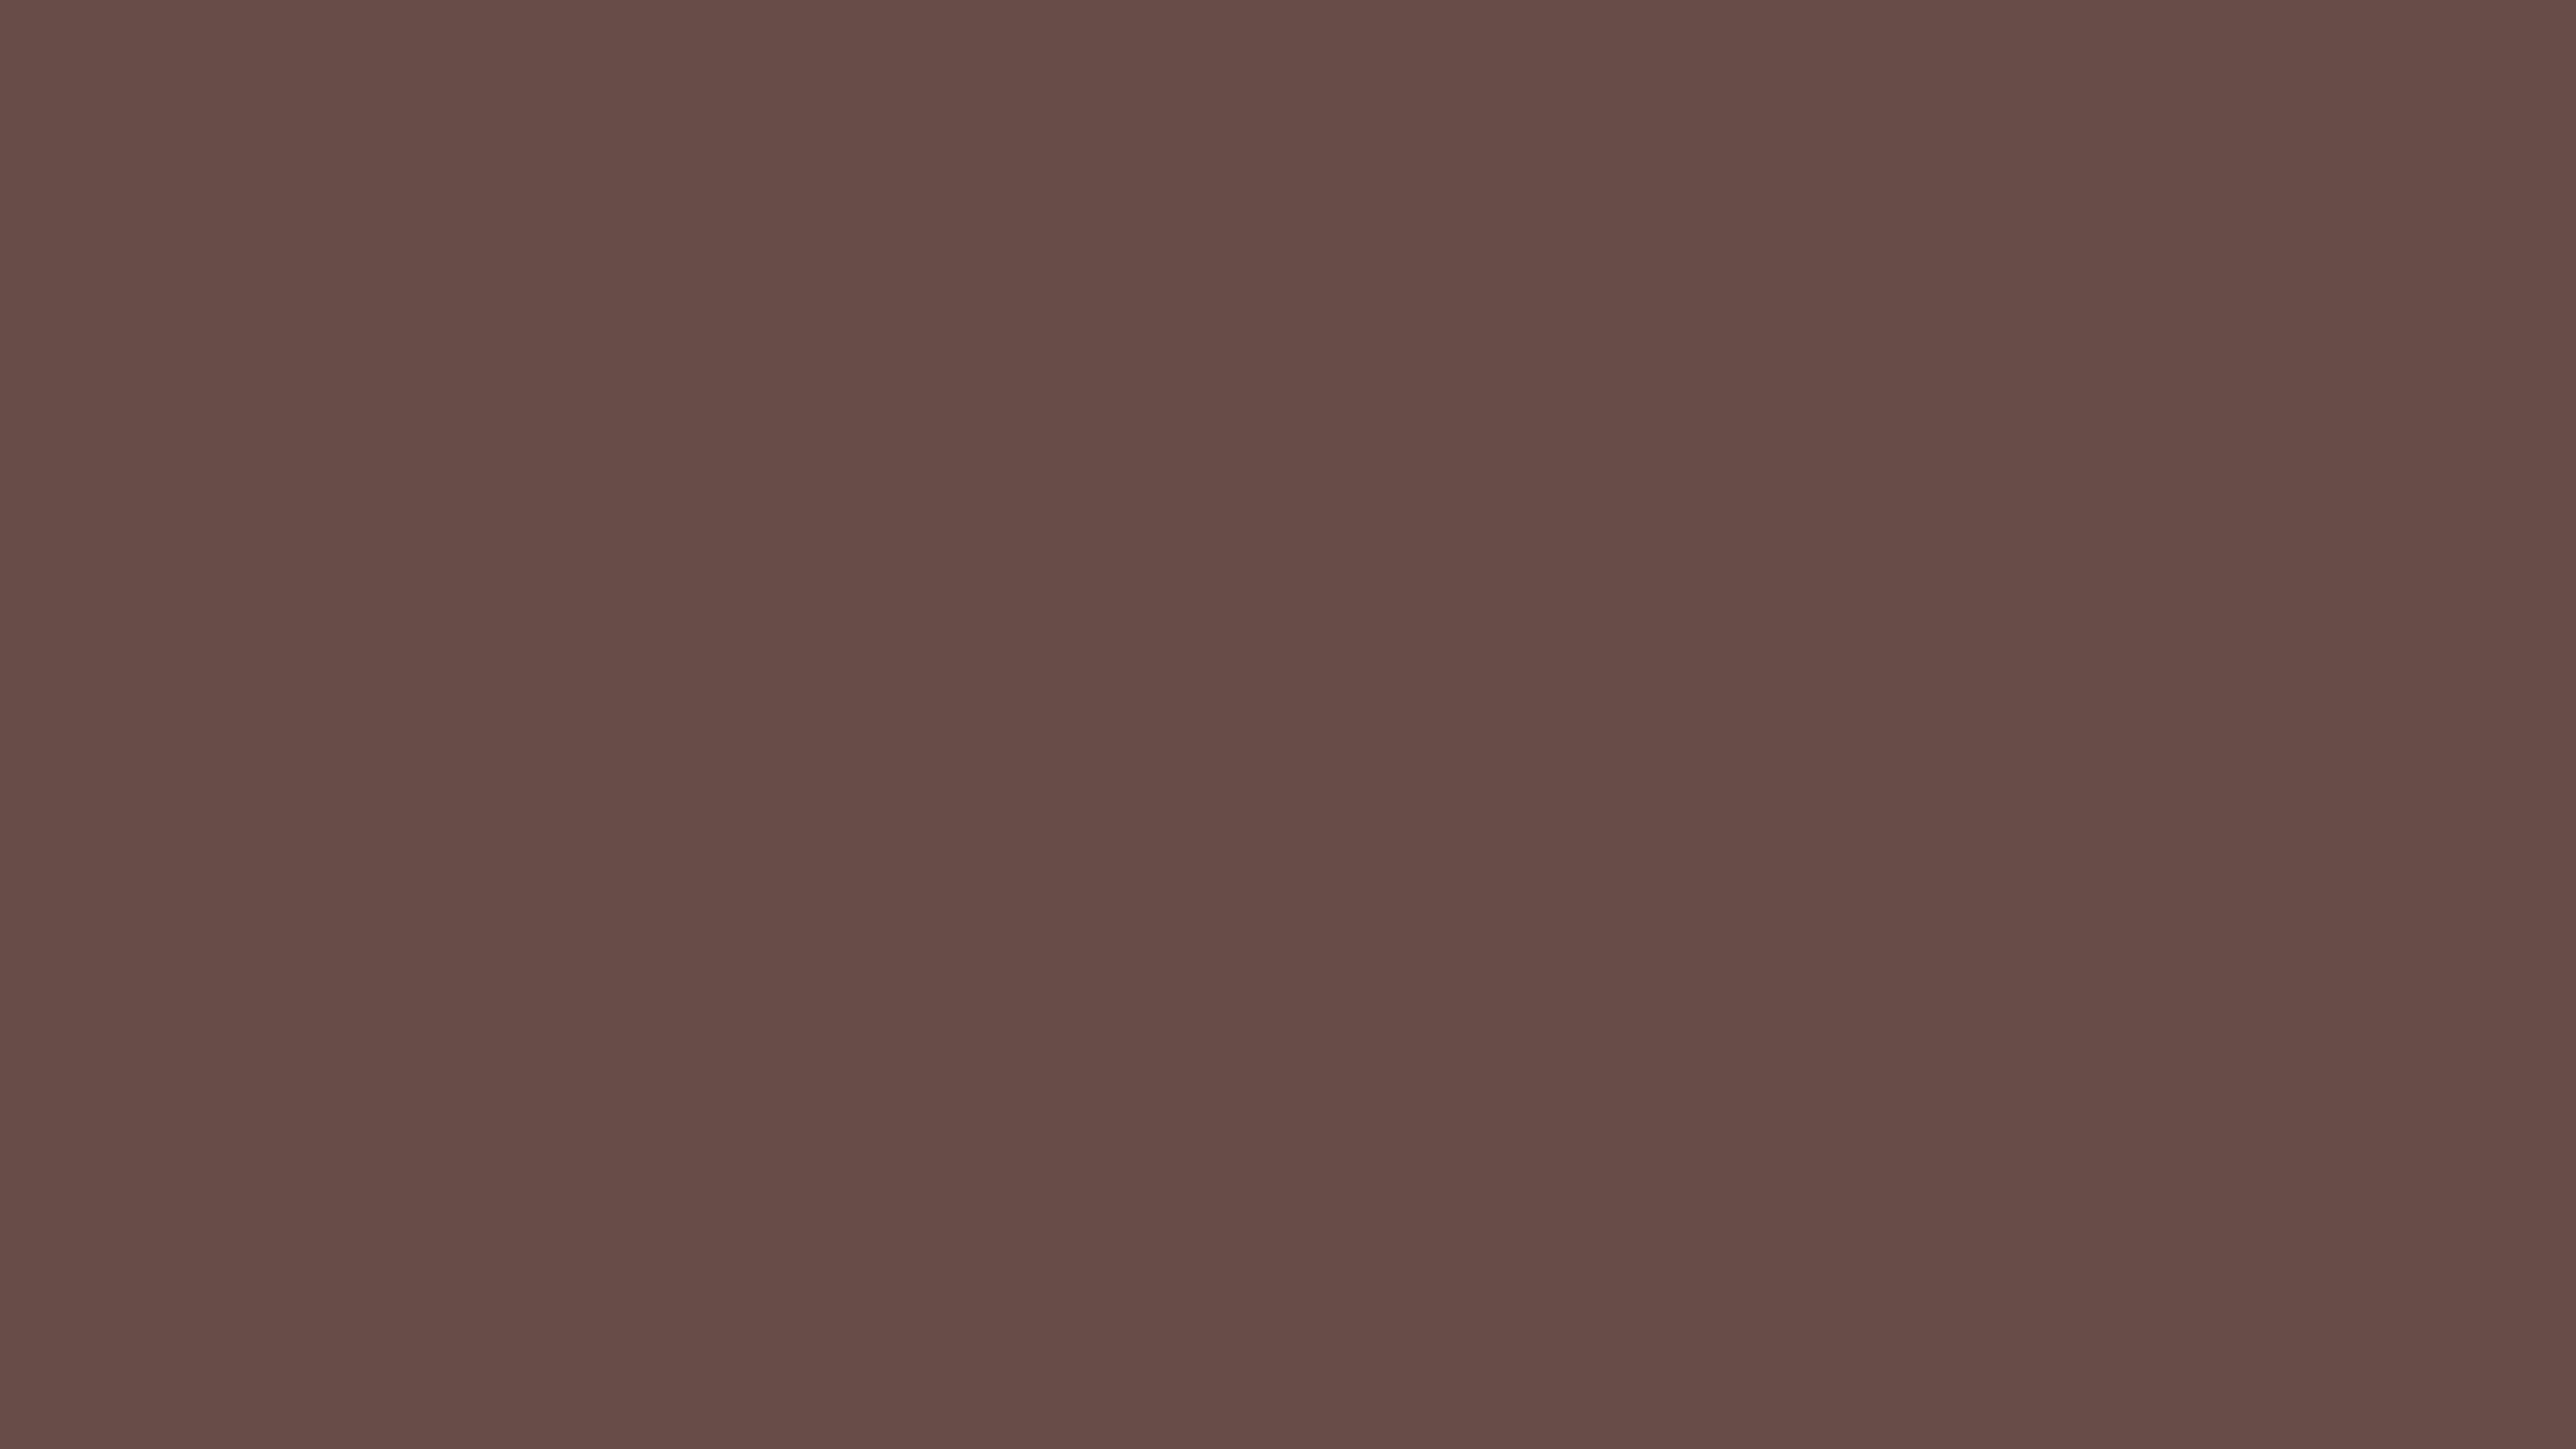 7680x4320 Medium Taupe Solid Color Background